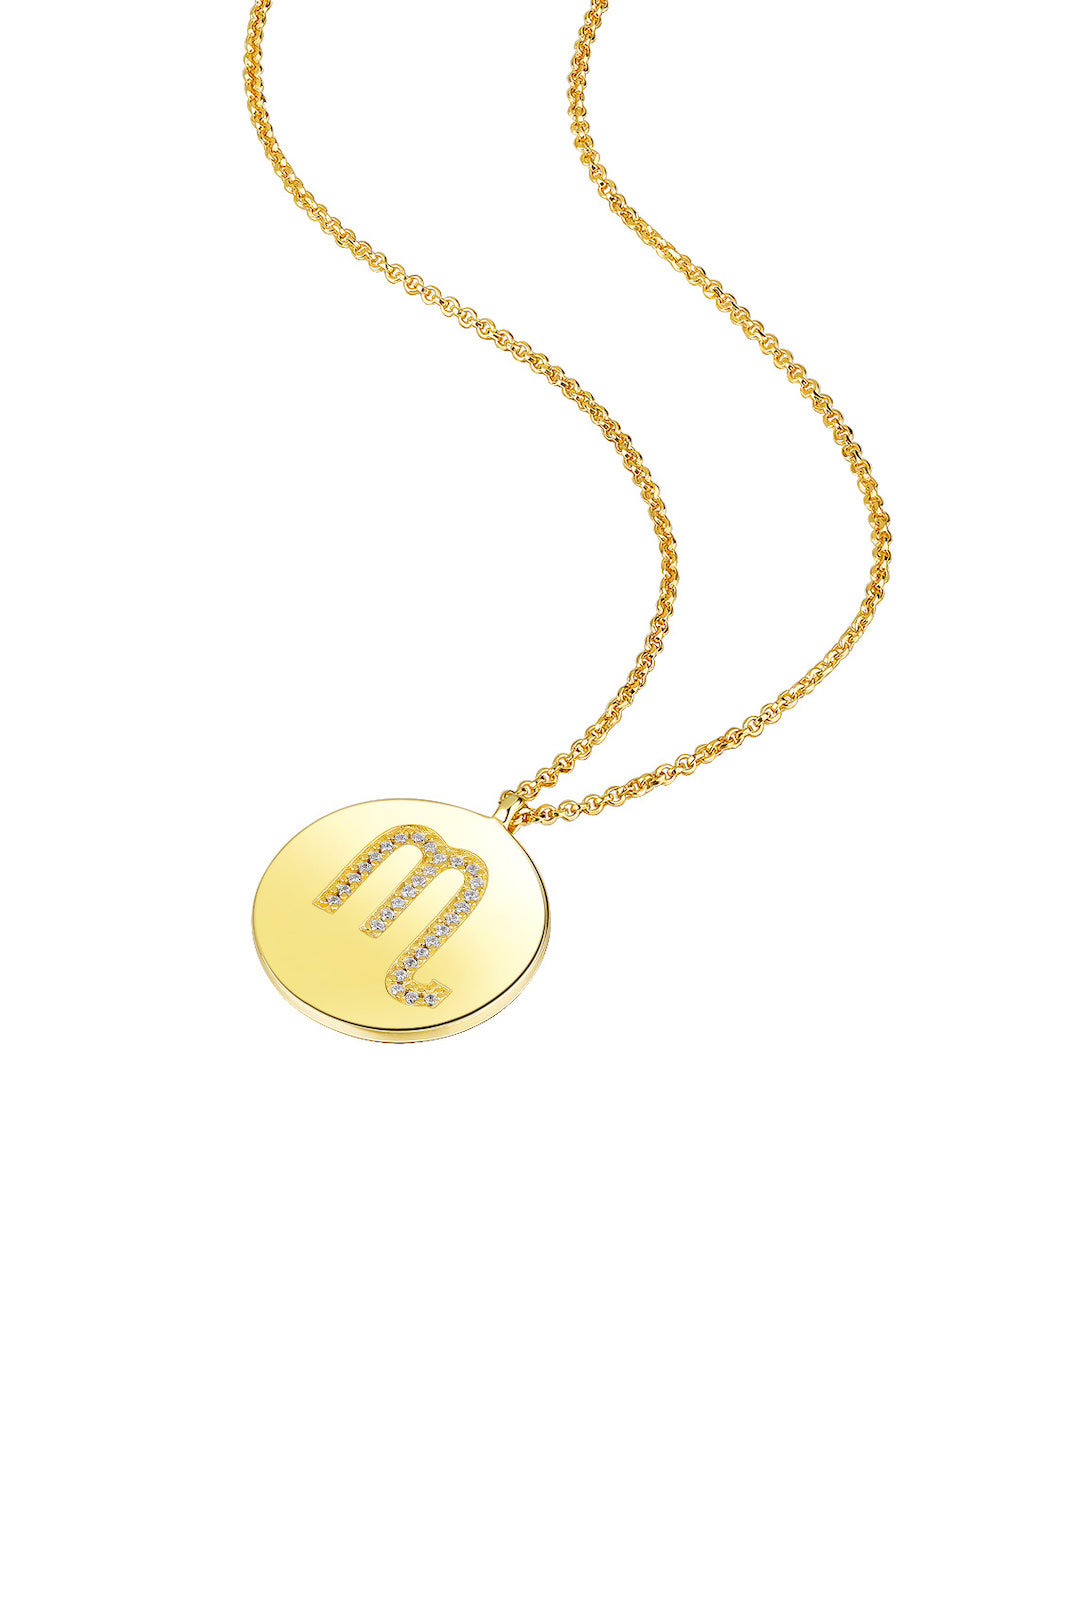 Gold Plated Silver Zodiac Necklace - Scorpio Side View